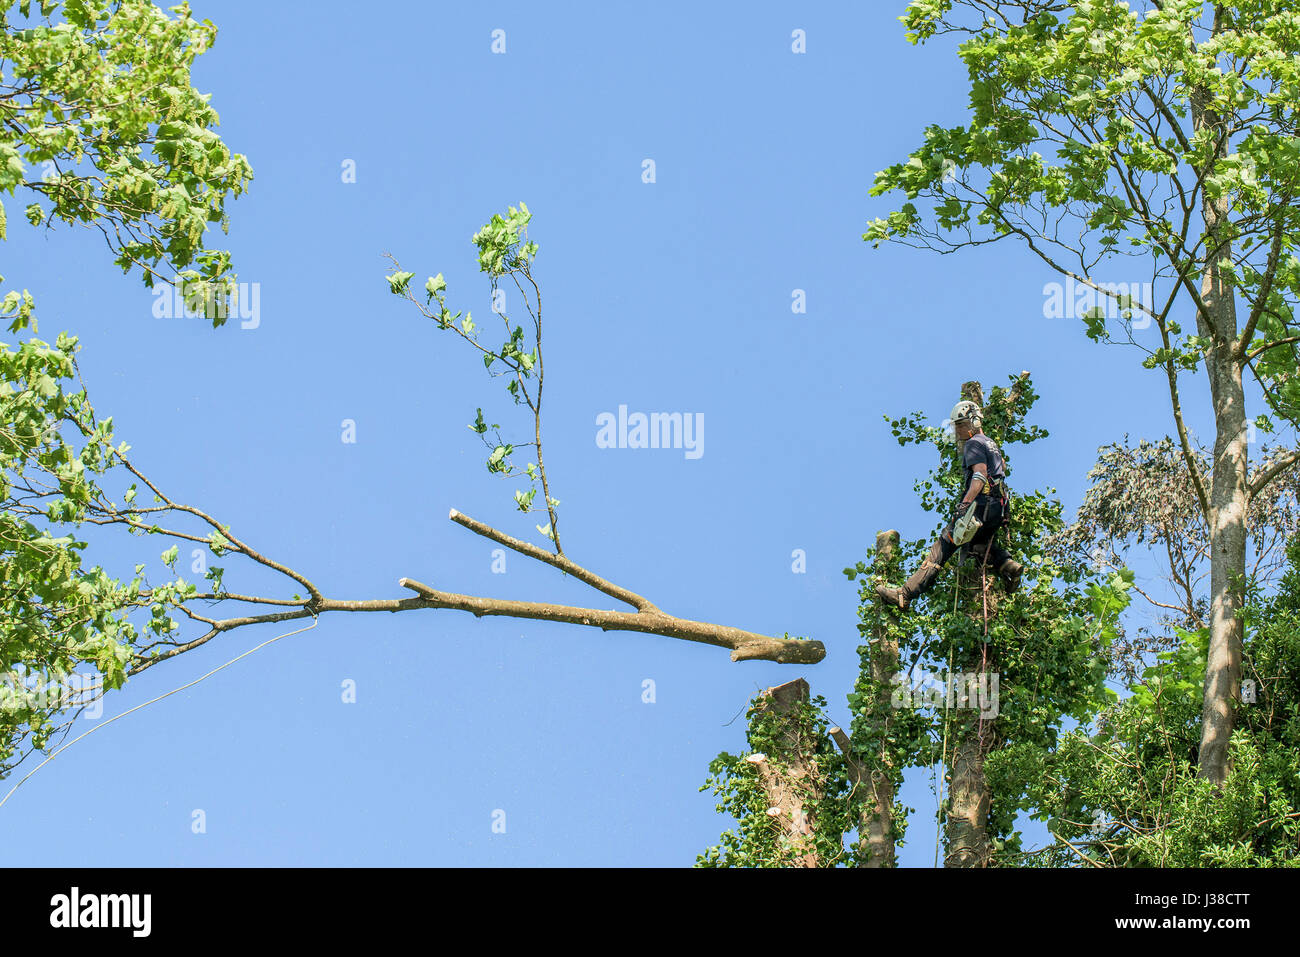 Tree surgeon Arboriculturist Climbing Tree Branches Foliage Rope Ropes Roped Arborist Safety harness Manual worker Protective workwear Stock Photo